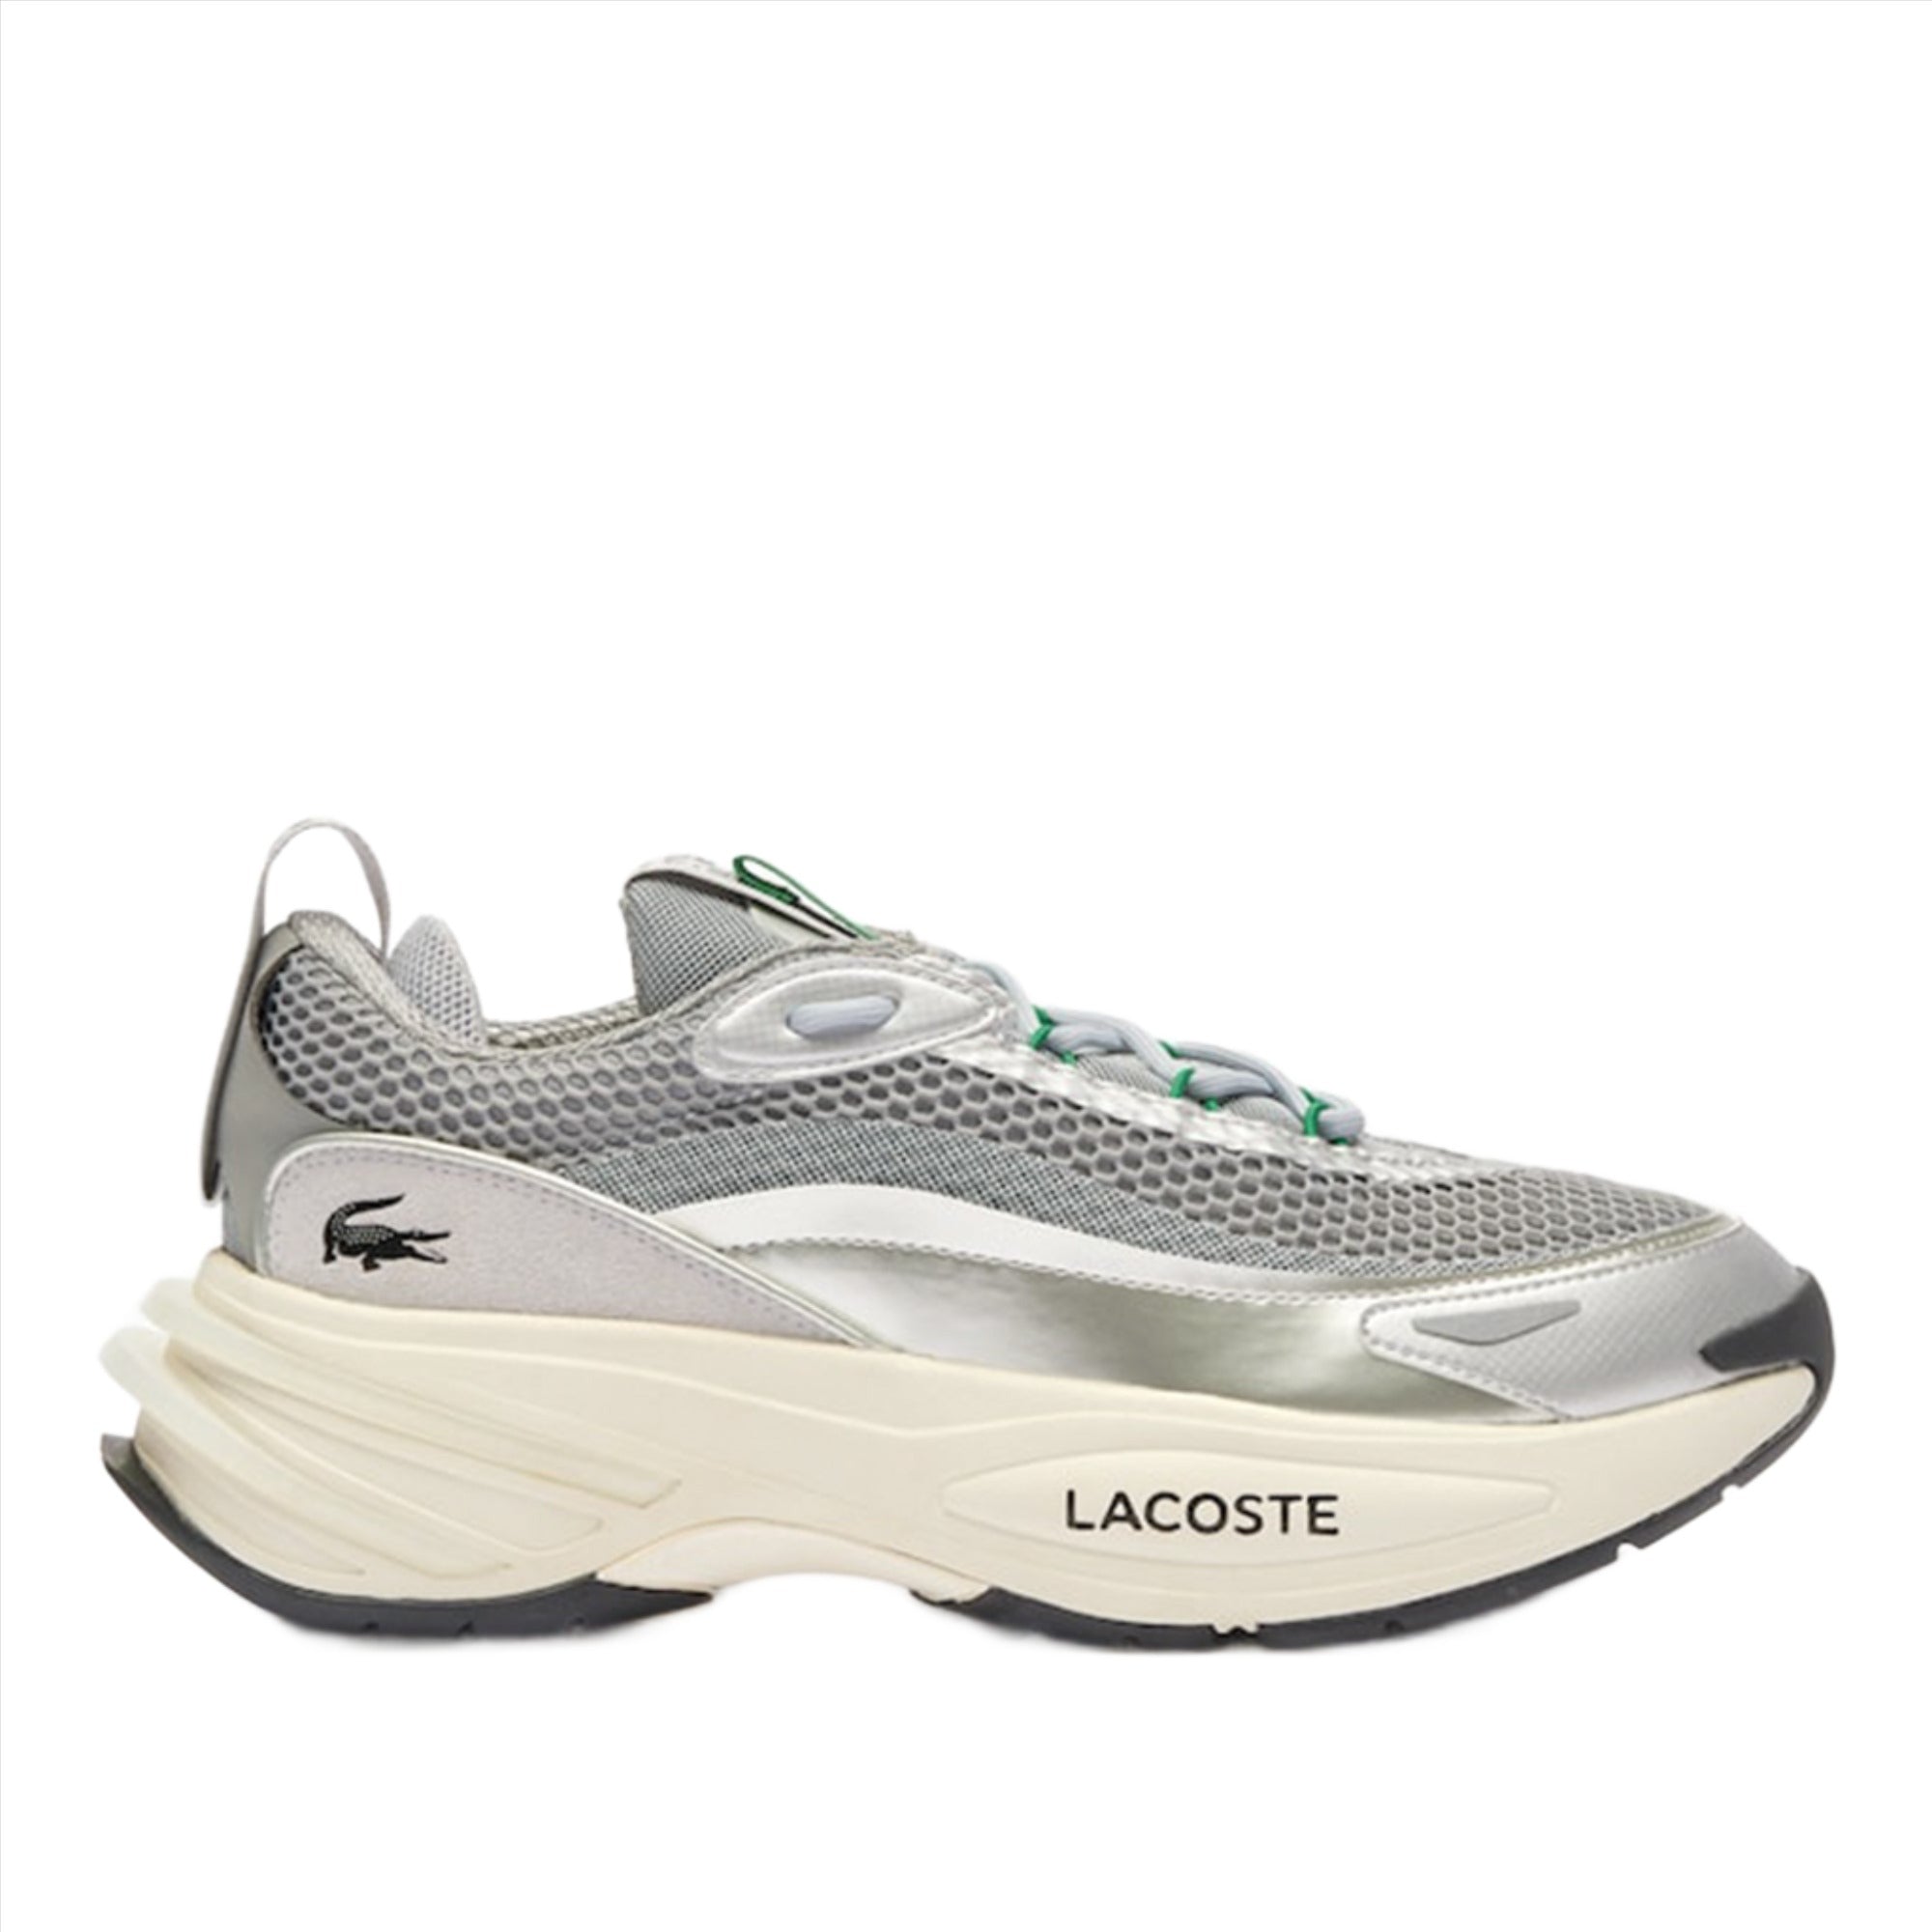 LACOSTE Men Audyssor Trainers Sneakers (Grey Silver)1